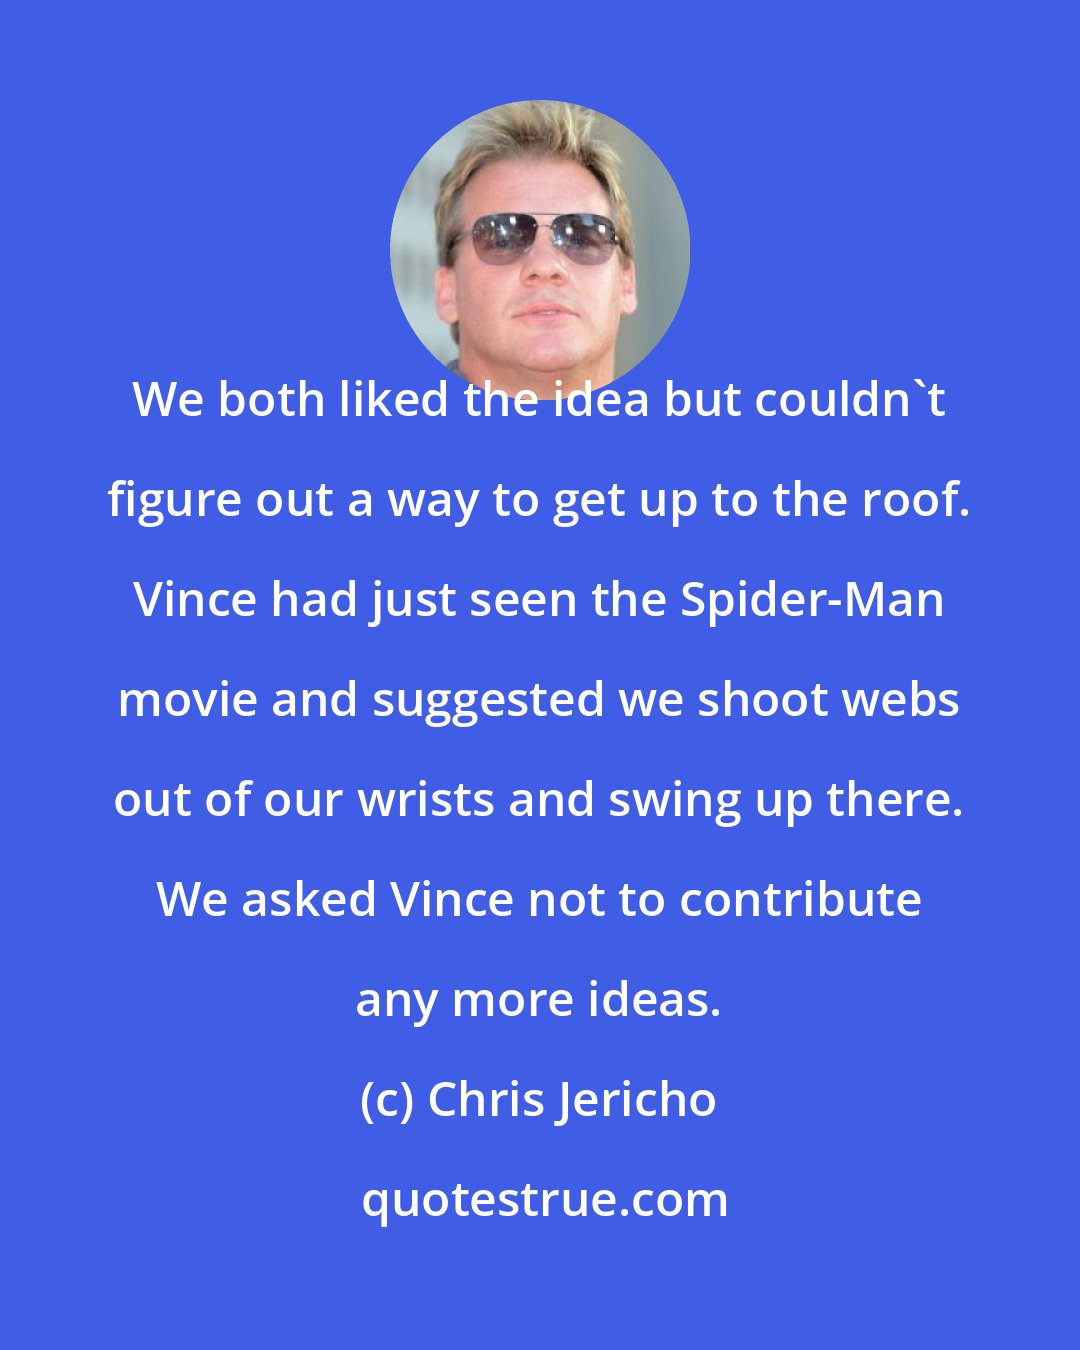 Chris Jericho: We both liked the idea but couldn't figure out a way to get up to the roof. Vince had just seen the Spider-Man movie and suggested we shoot webs out of our wrists and swing up there. We asked Vince not to contribute any more ideas.